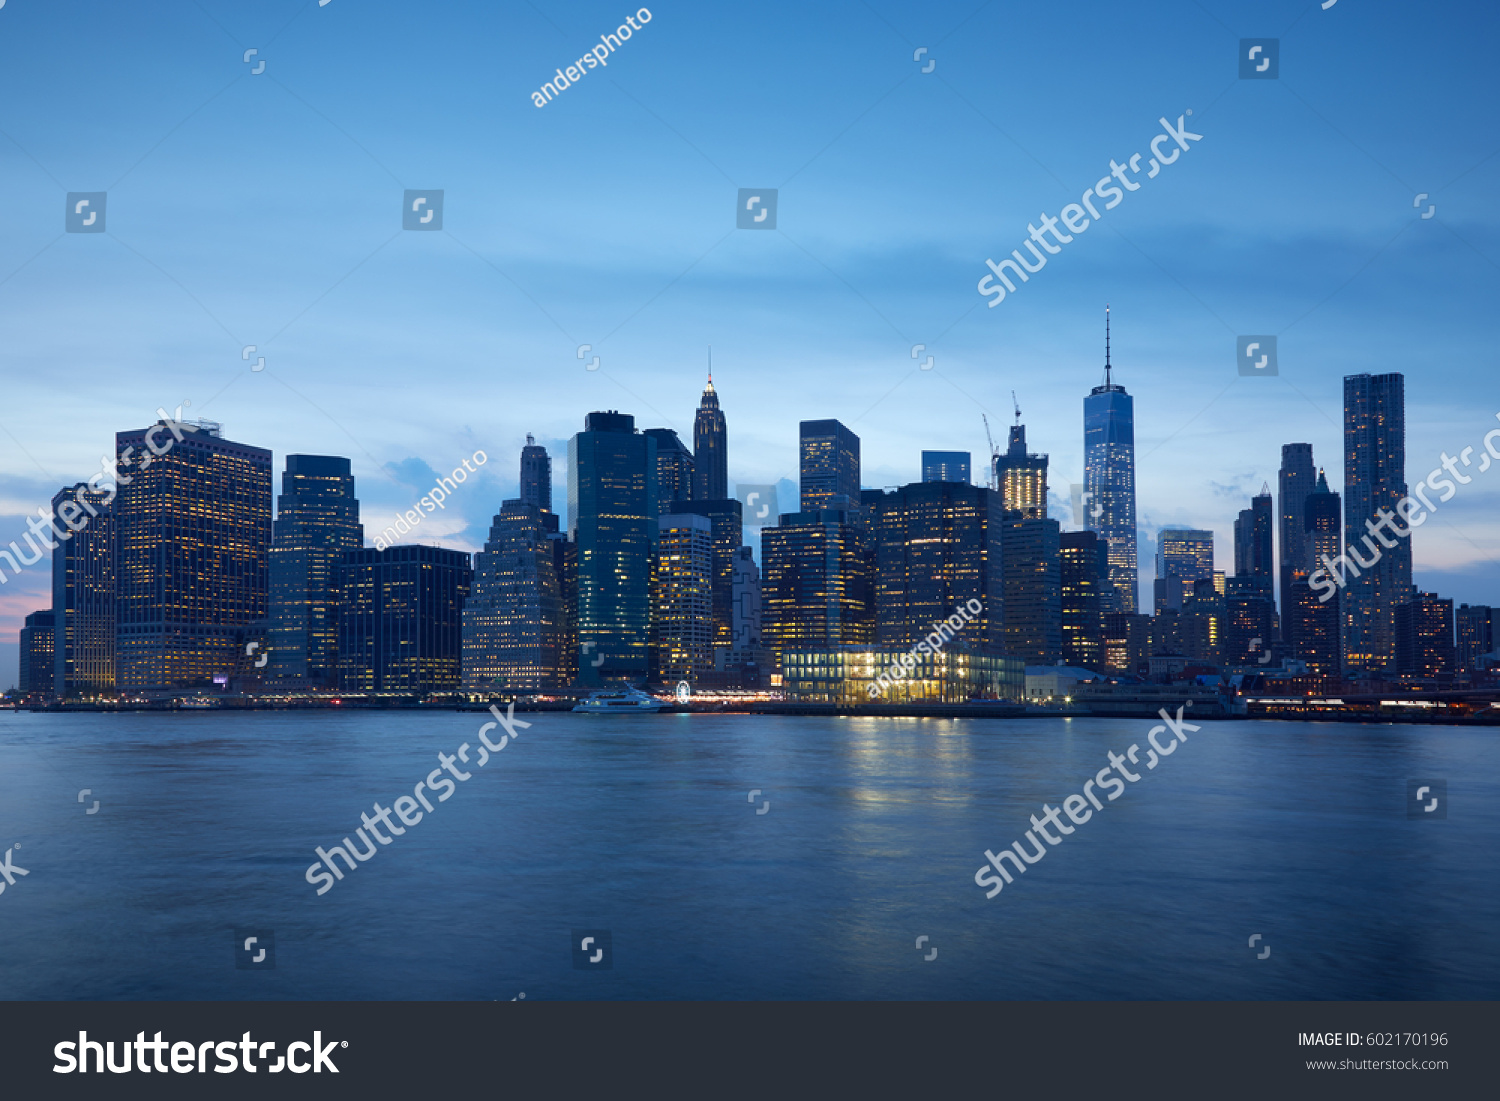 New York city skyline with illuminated buildings in the blue evening hour #602170196